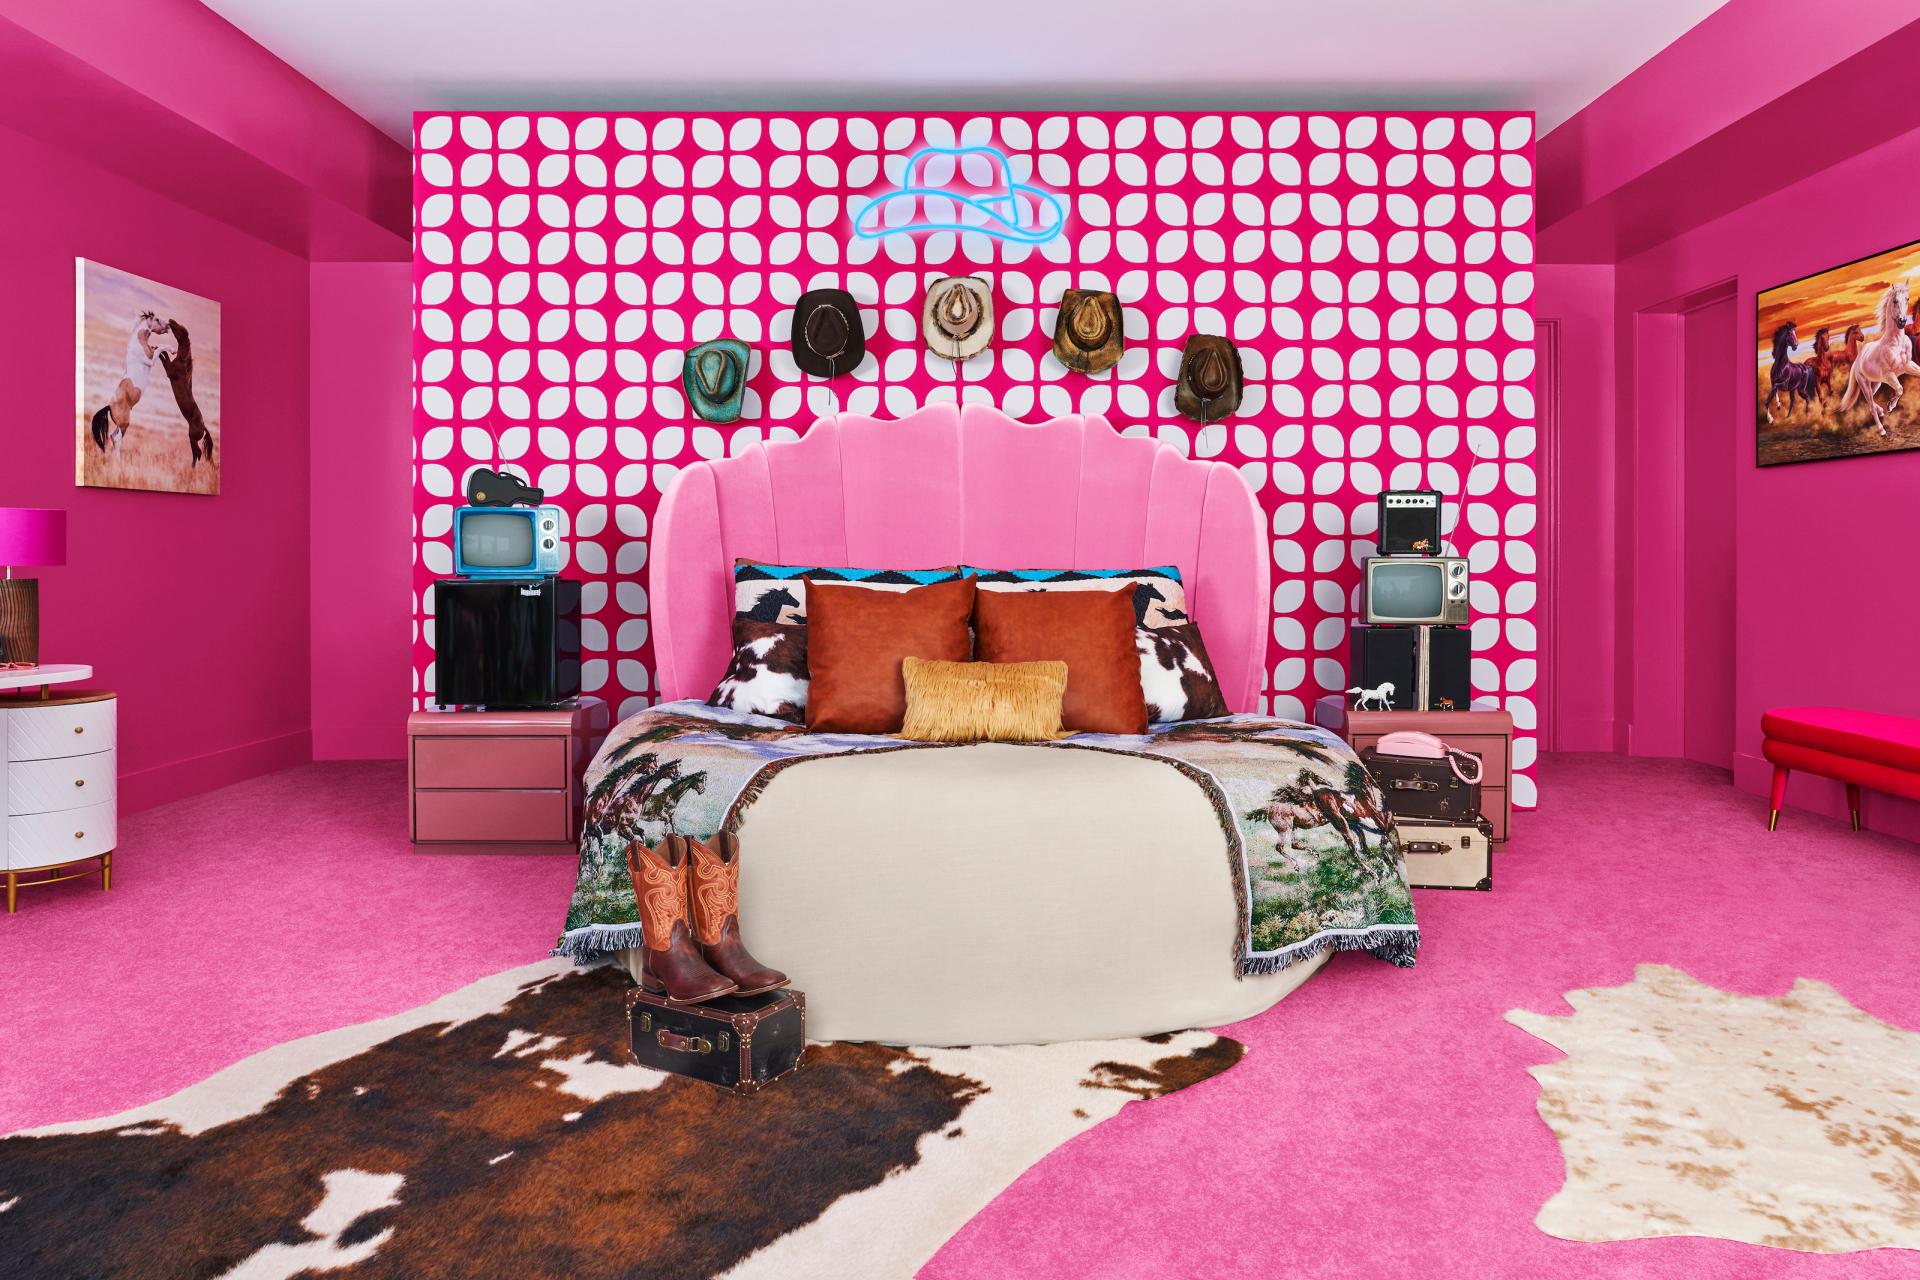 Barbie’s pink-drenched Malibu DreamHouse is hitting Airbnb again – this time, Ken is hosting